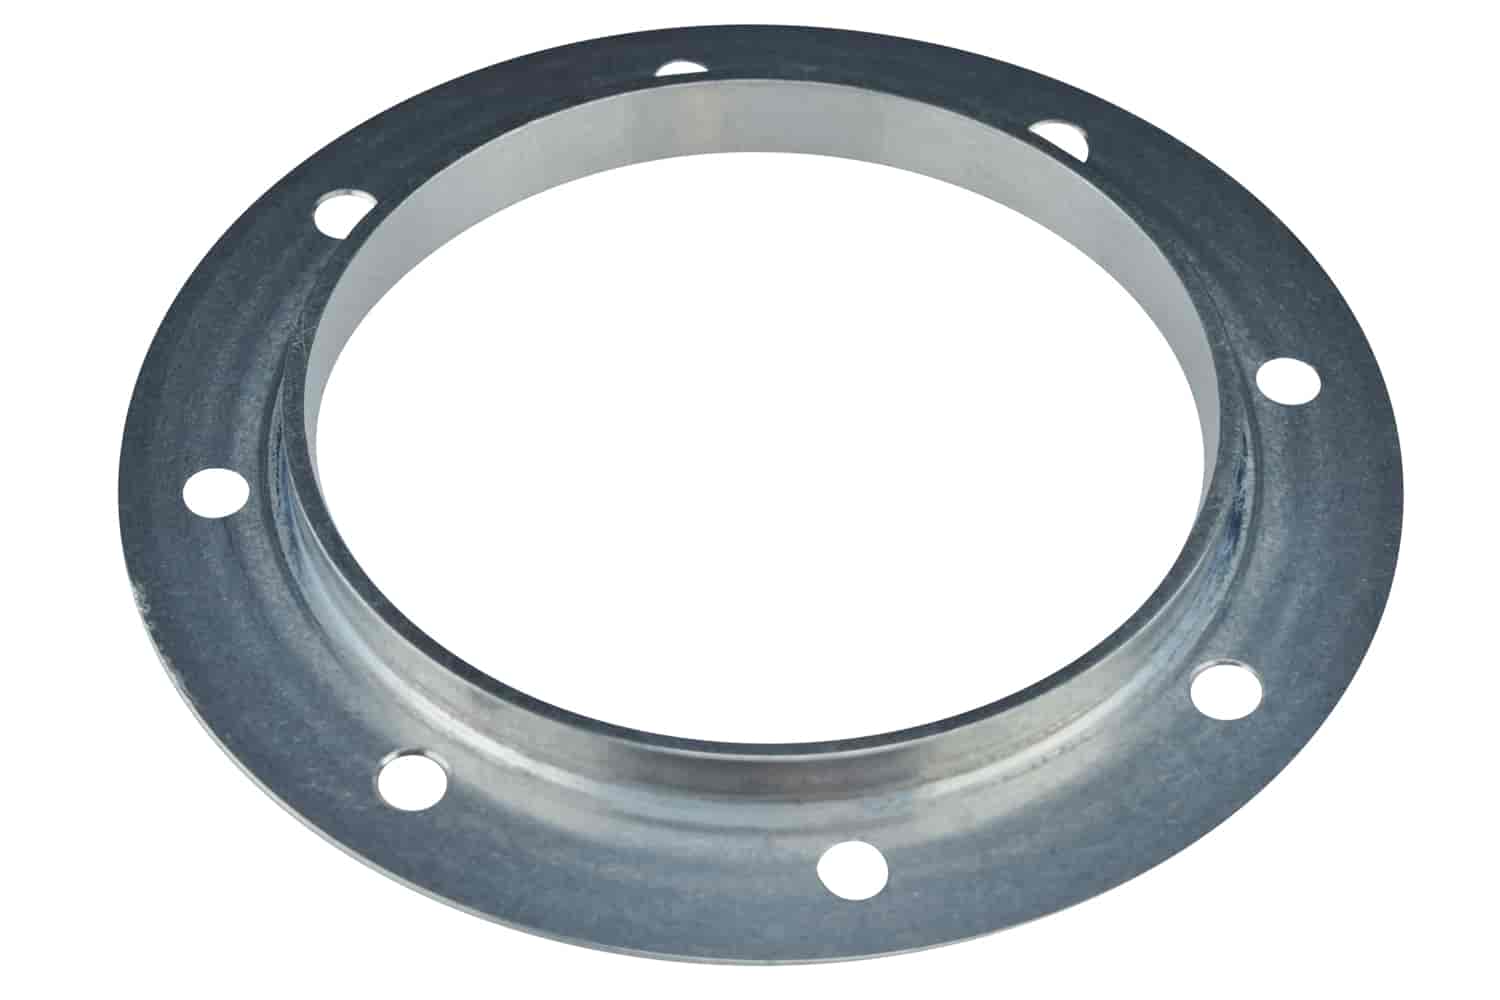 Exhaust Pipe Fender Exit Bezel for 4.5" Turbo Downpipe